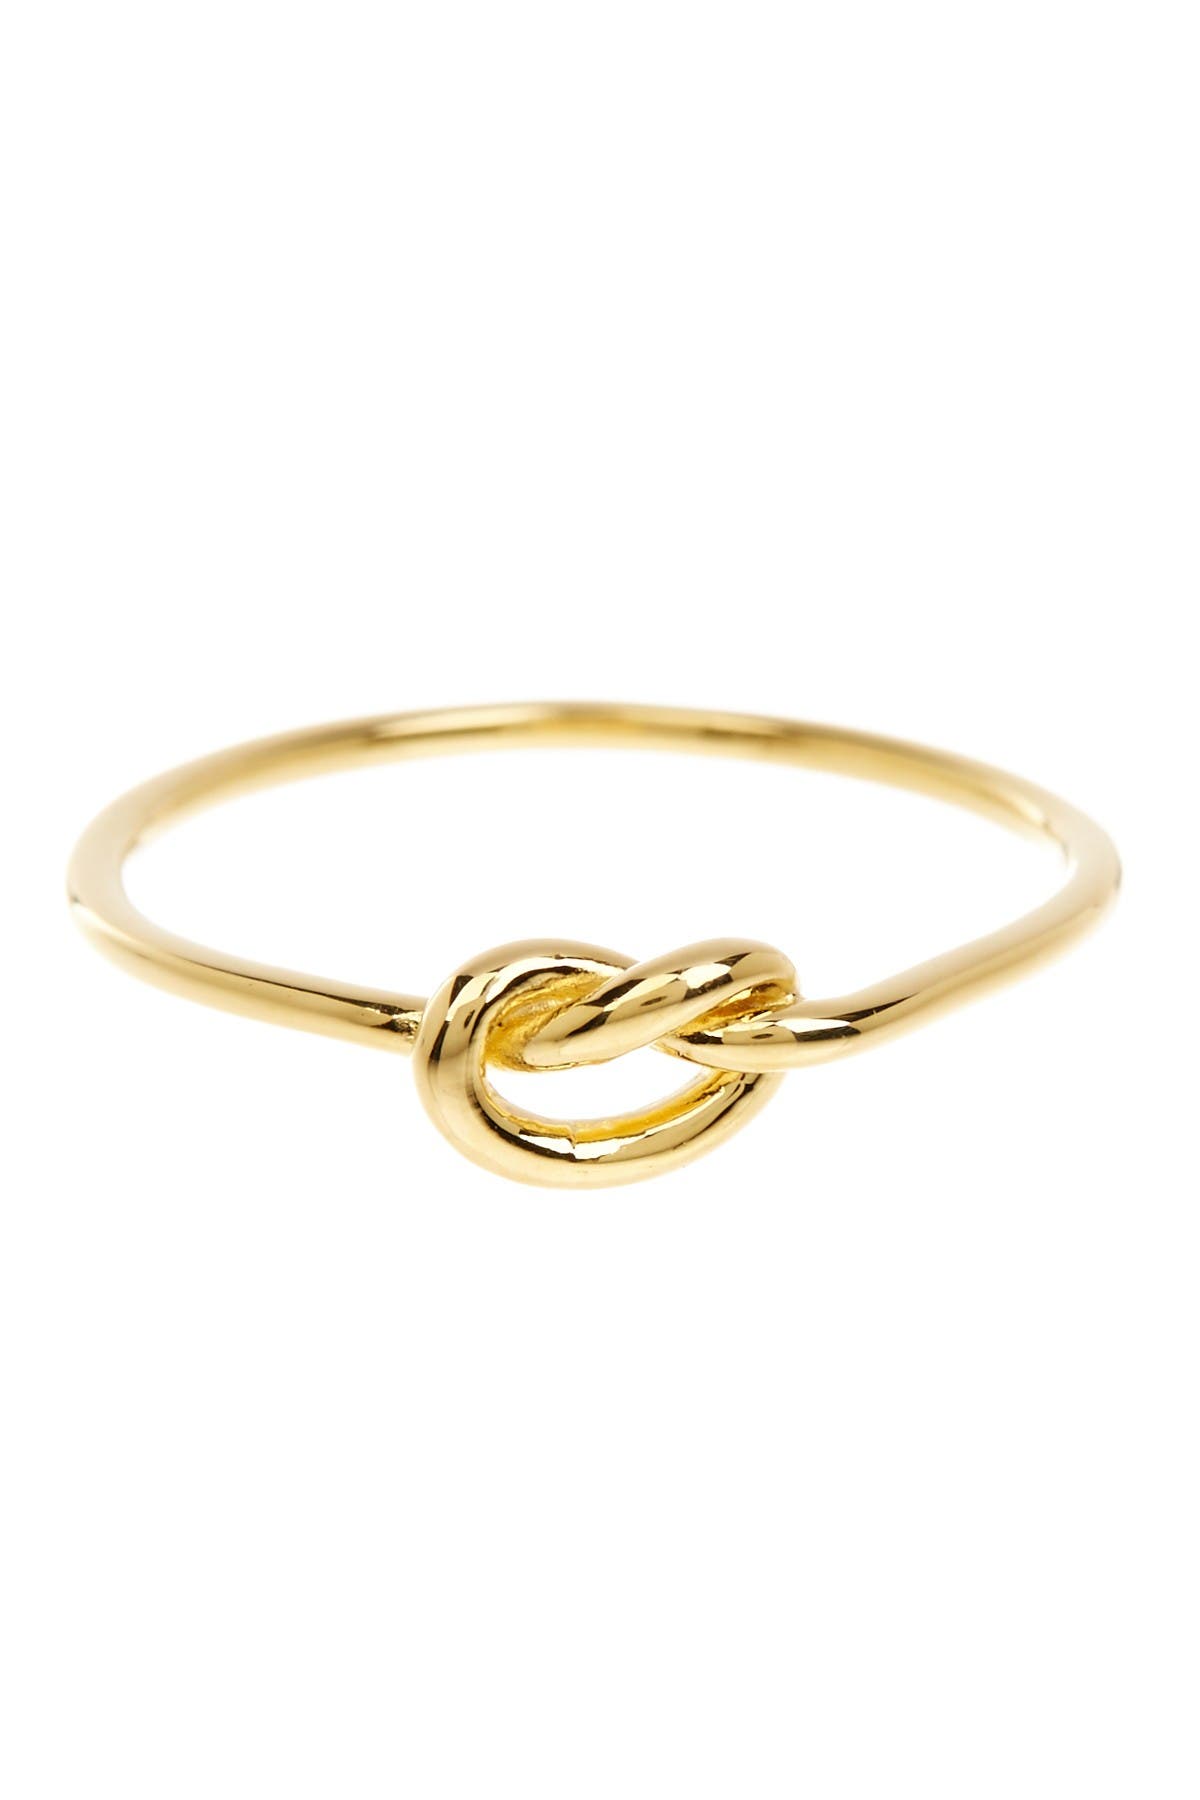 Details about   14k Yellow Gold Polished Knot Ring